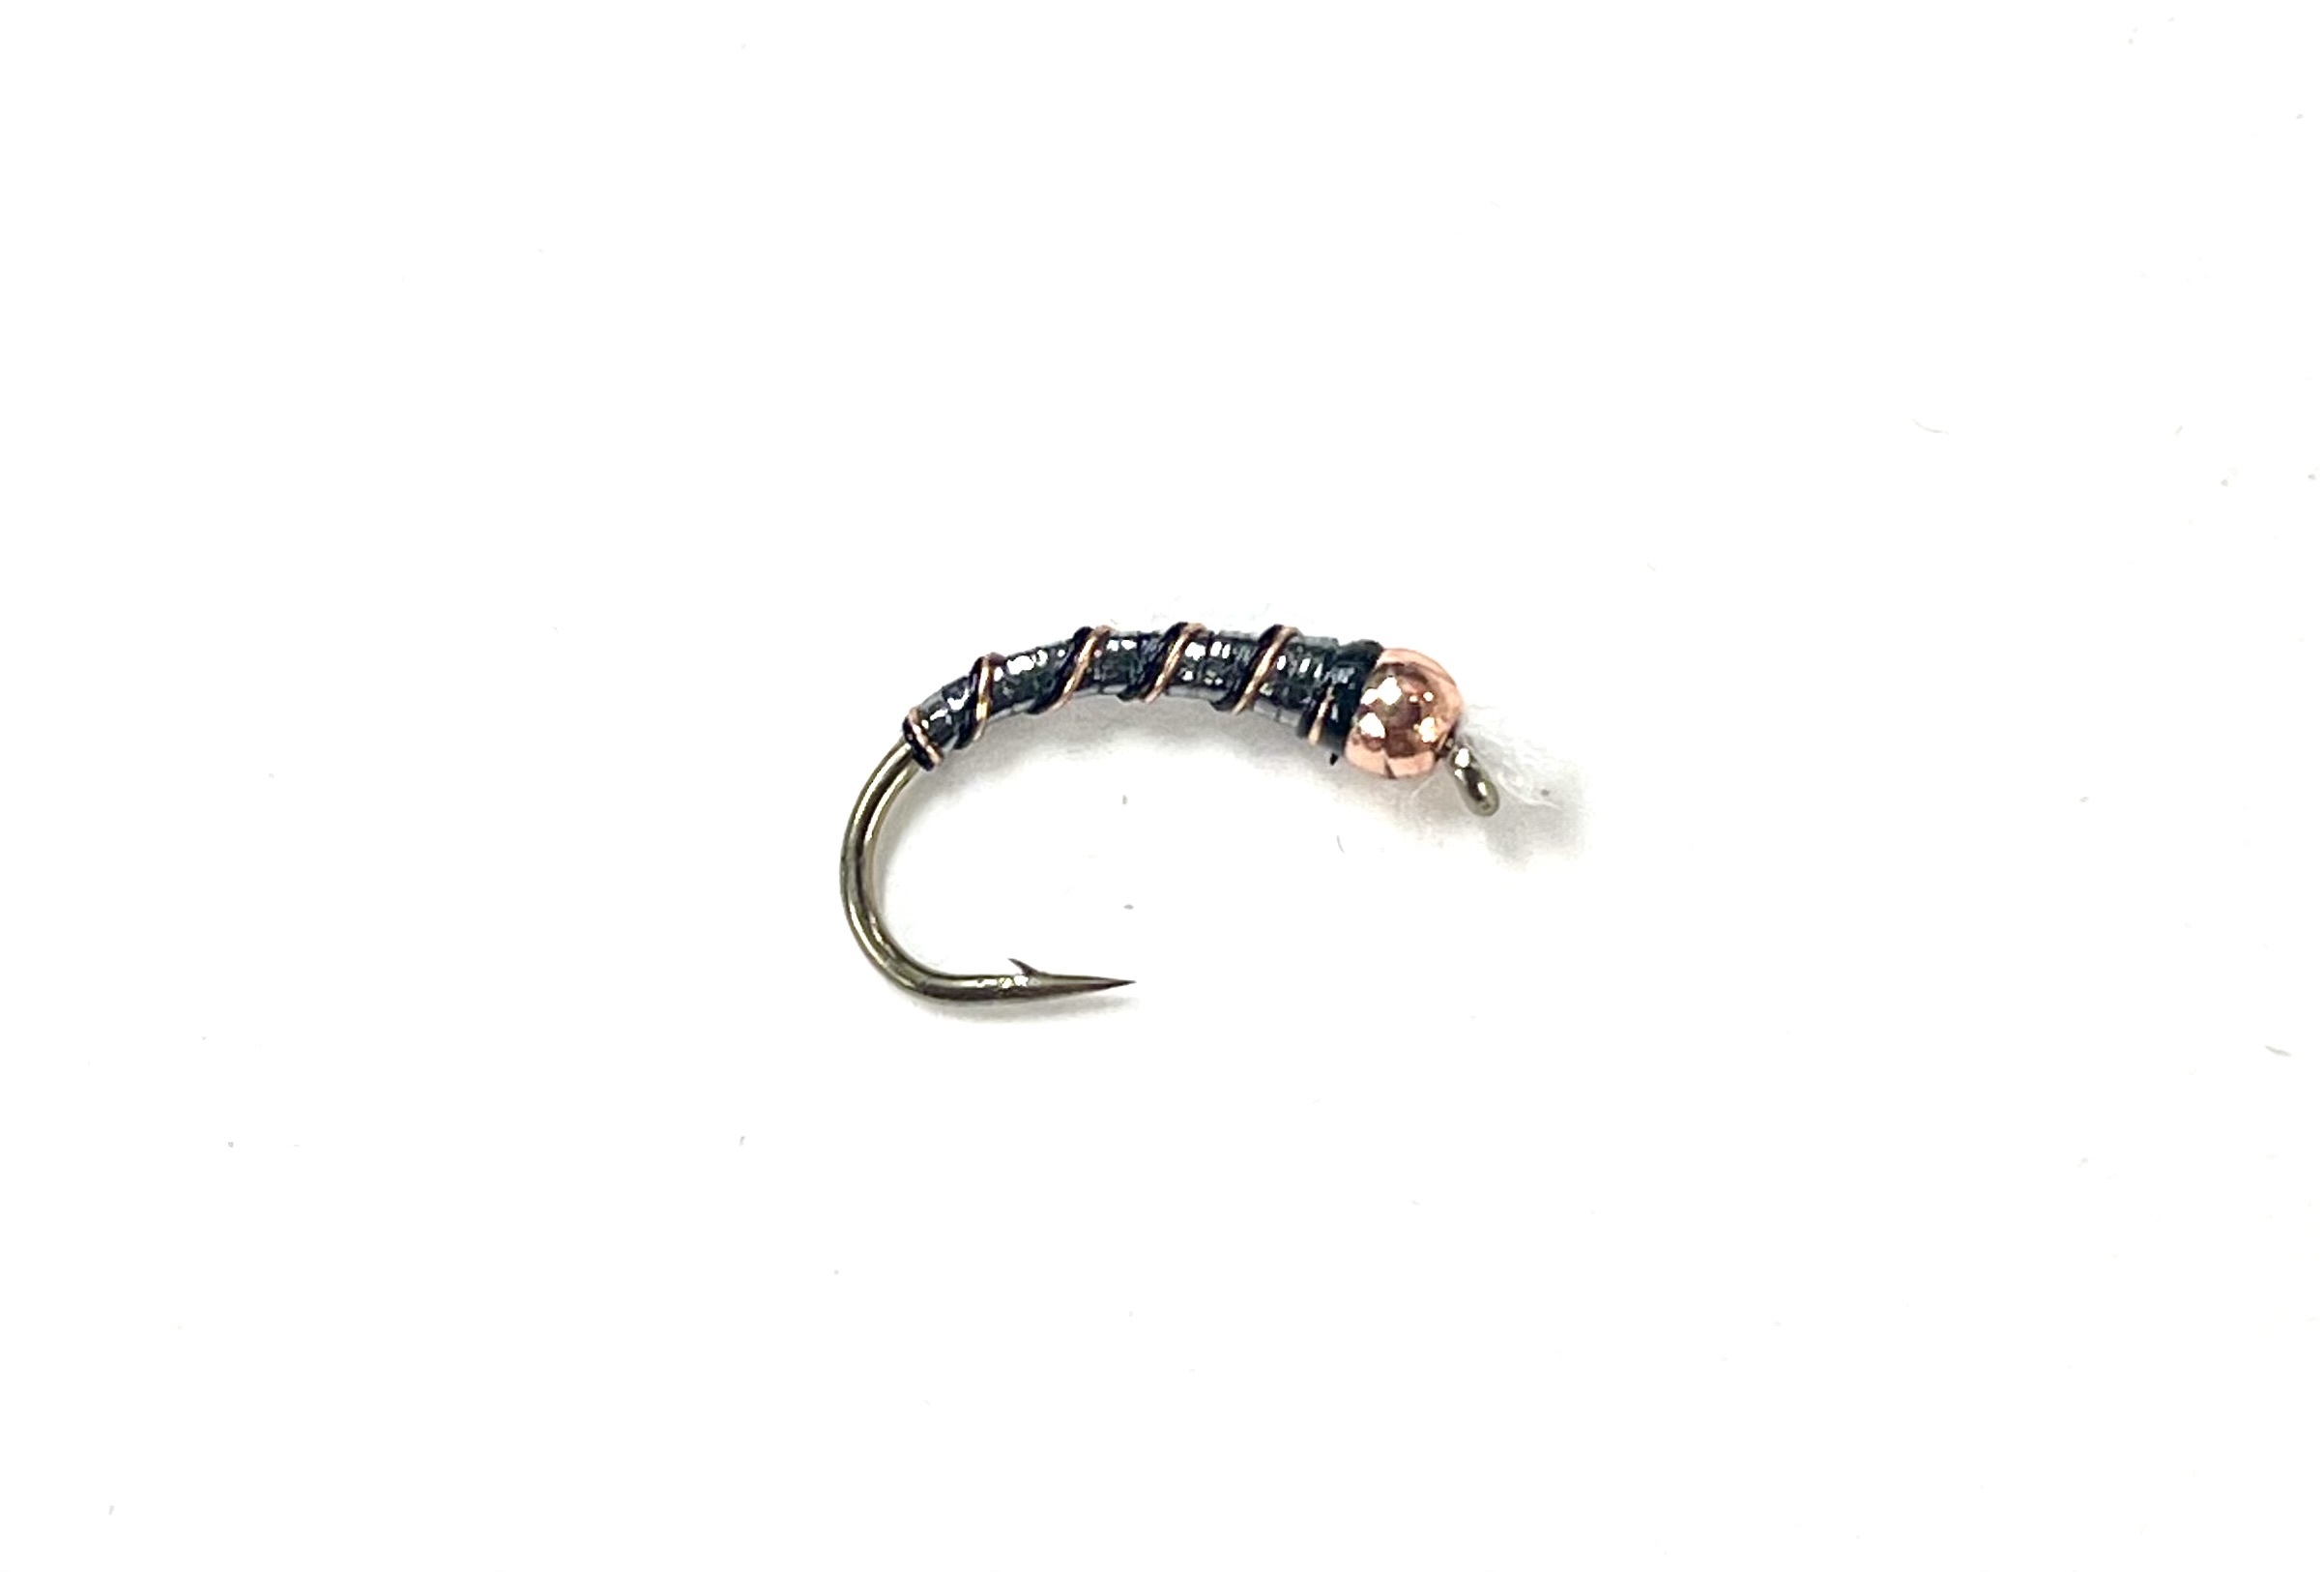 M&Y Copper Bead ASB Double Rib Chironomid - Size 10